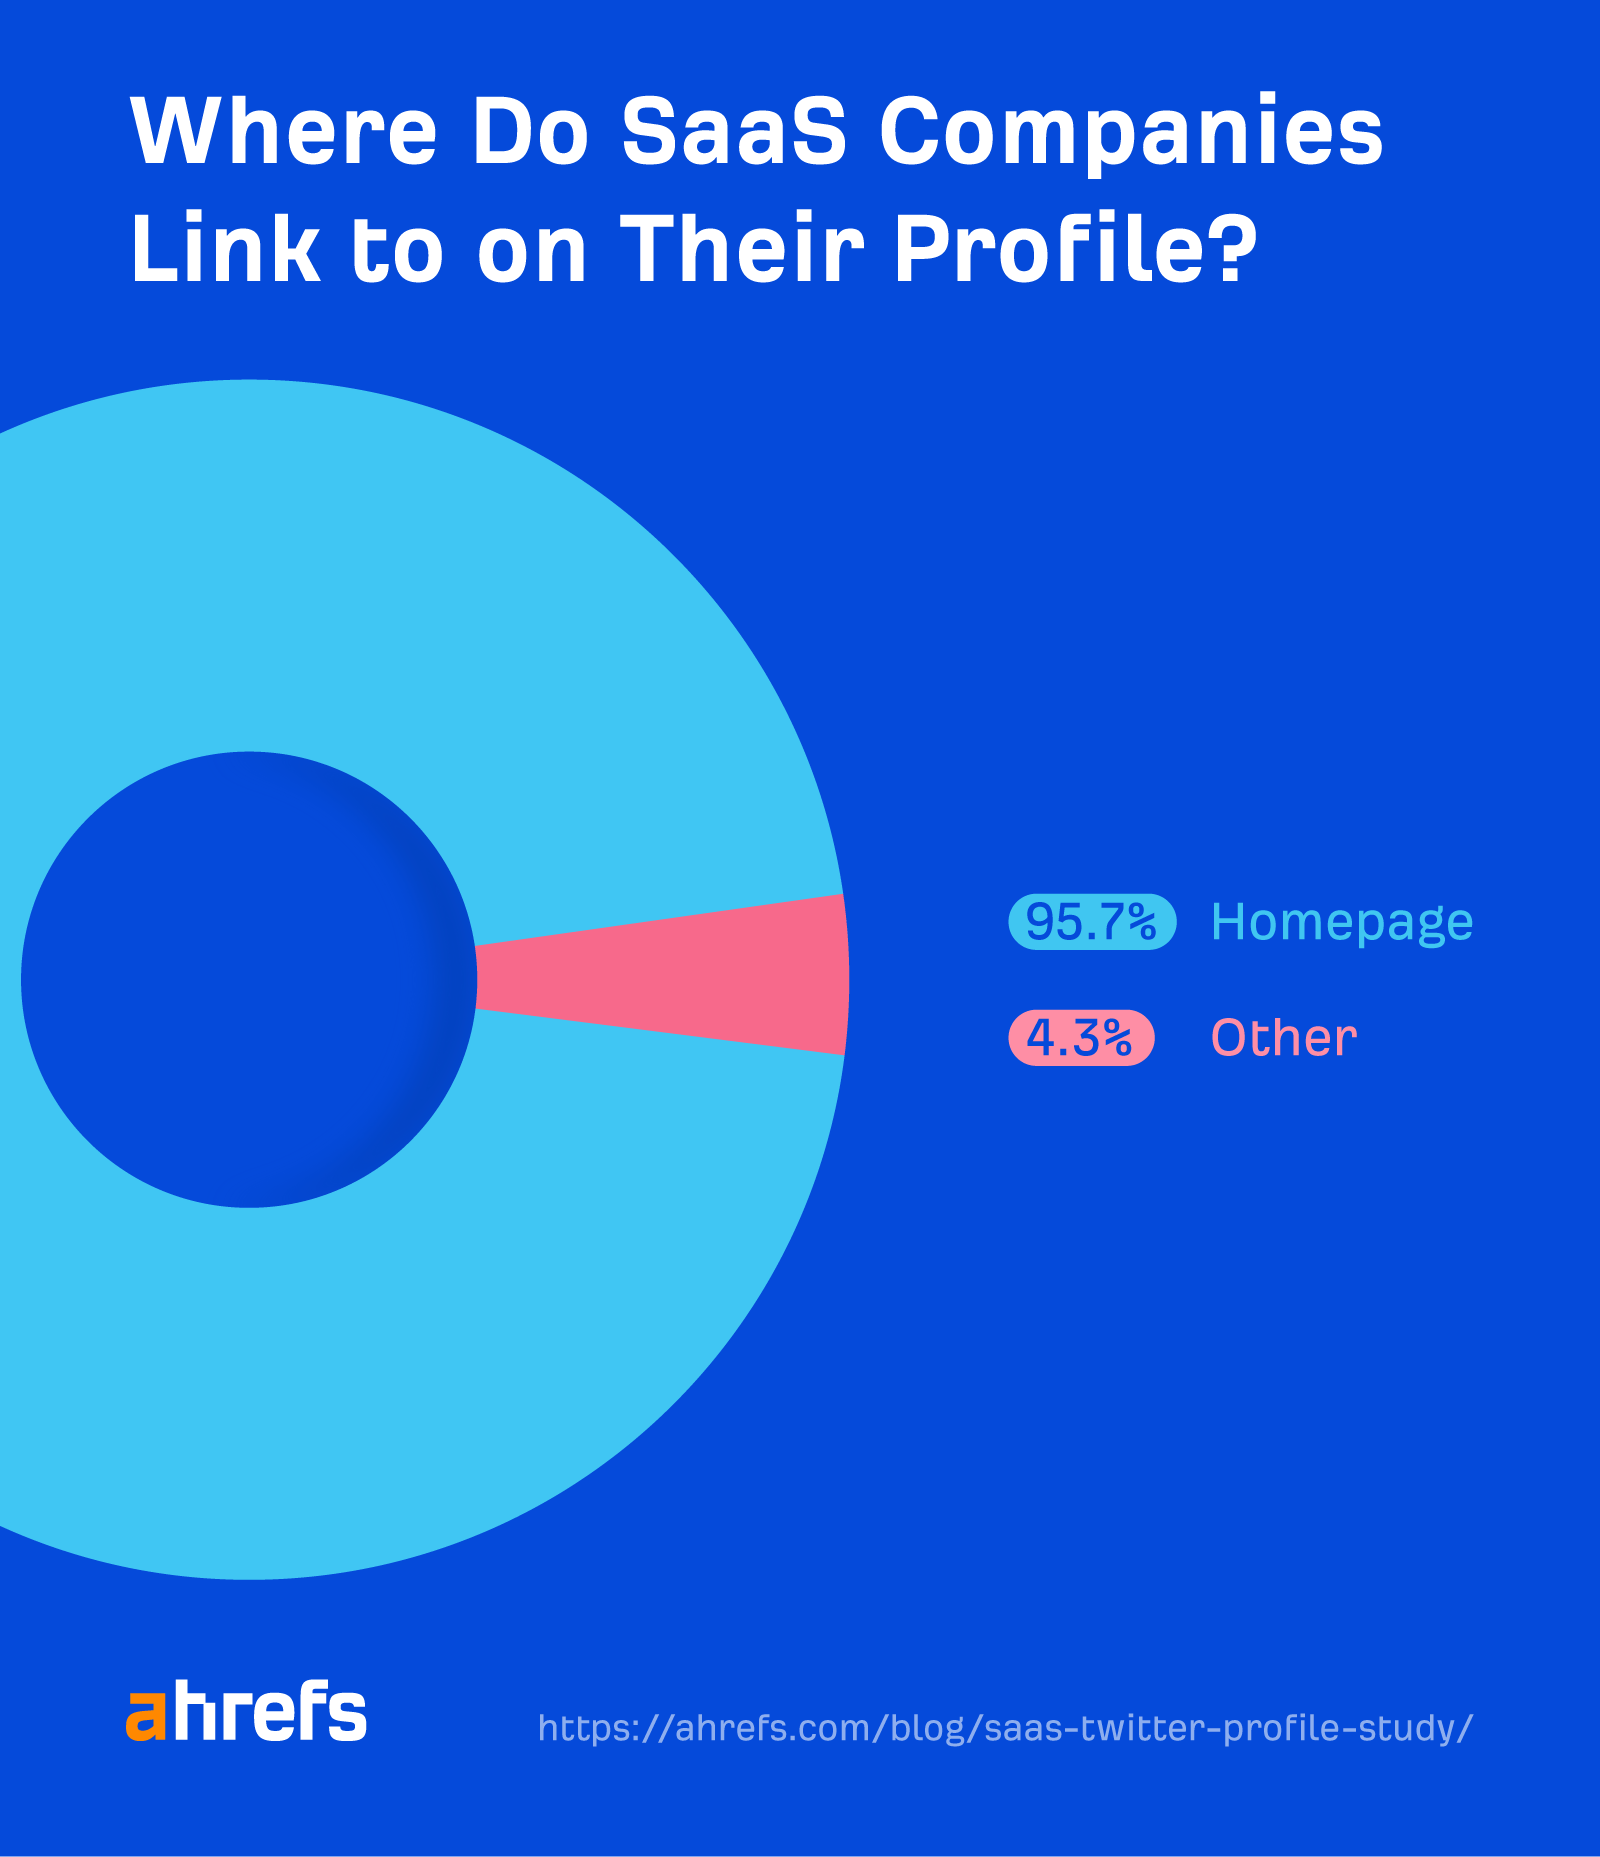 95.7% of SaaS companies link to their homepage on their profile
